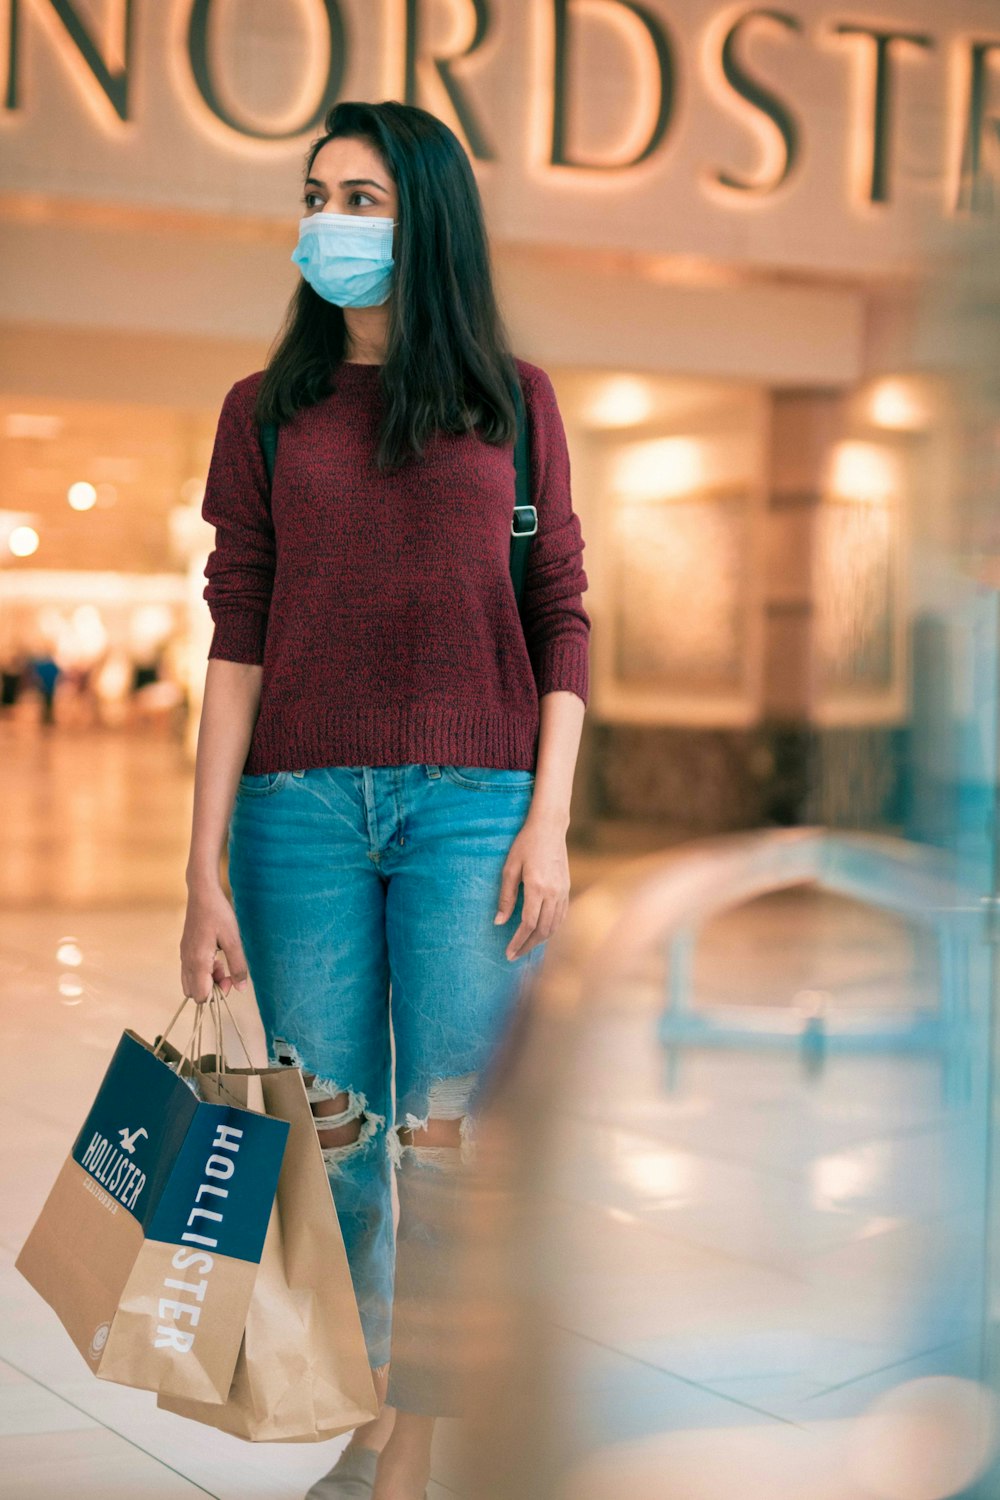 woman in red long sleeve shirt and blue denim jeans holding blue shopping bag